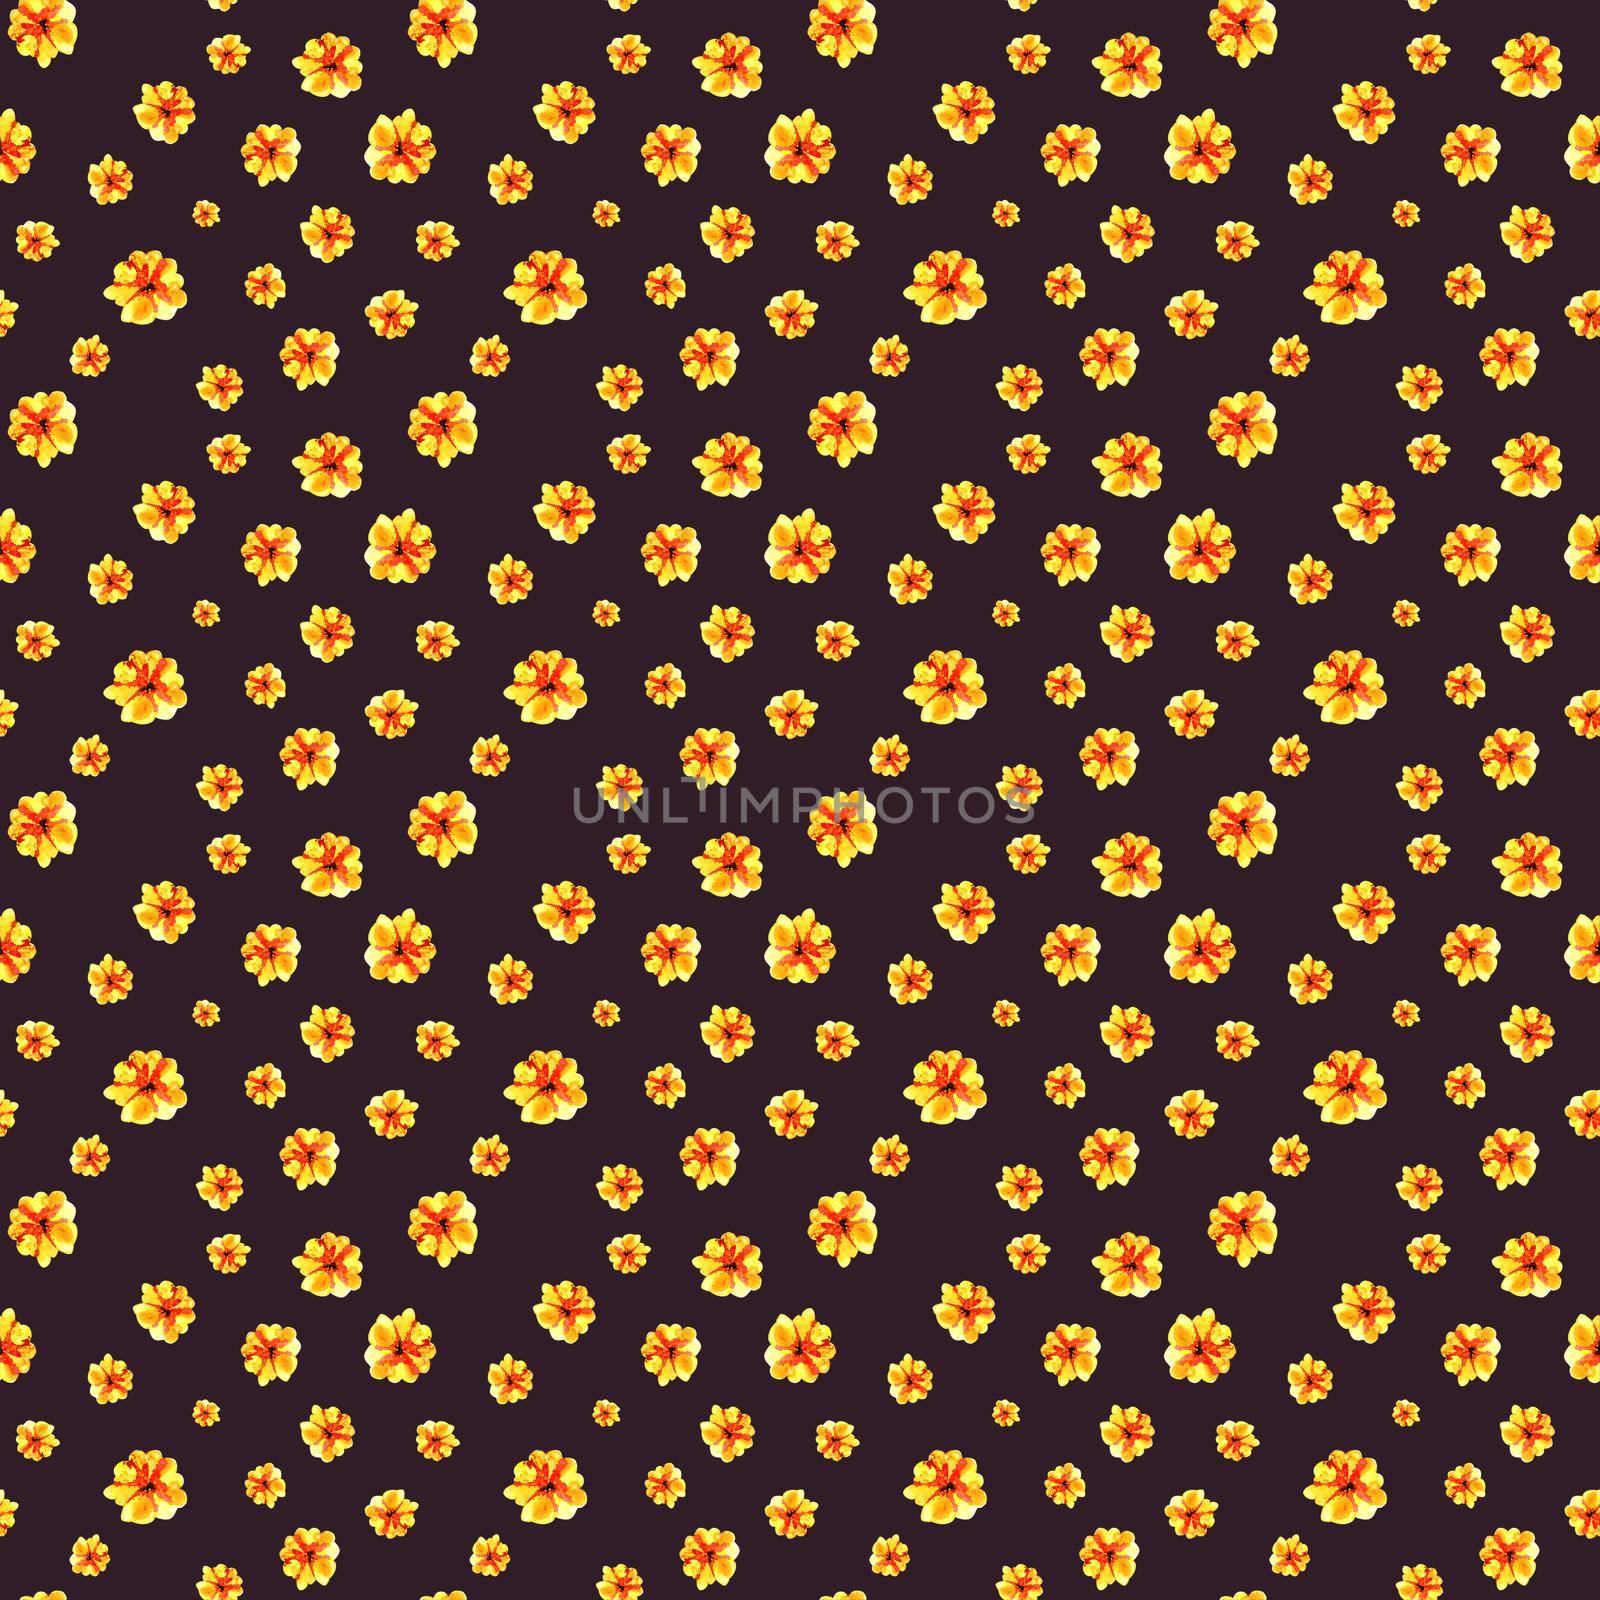 Lovely floral seamless pattern illustration of yellow flower by DesignAB